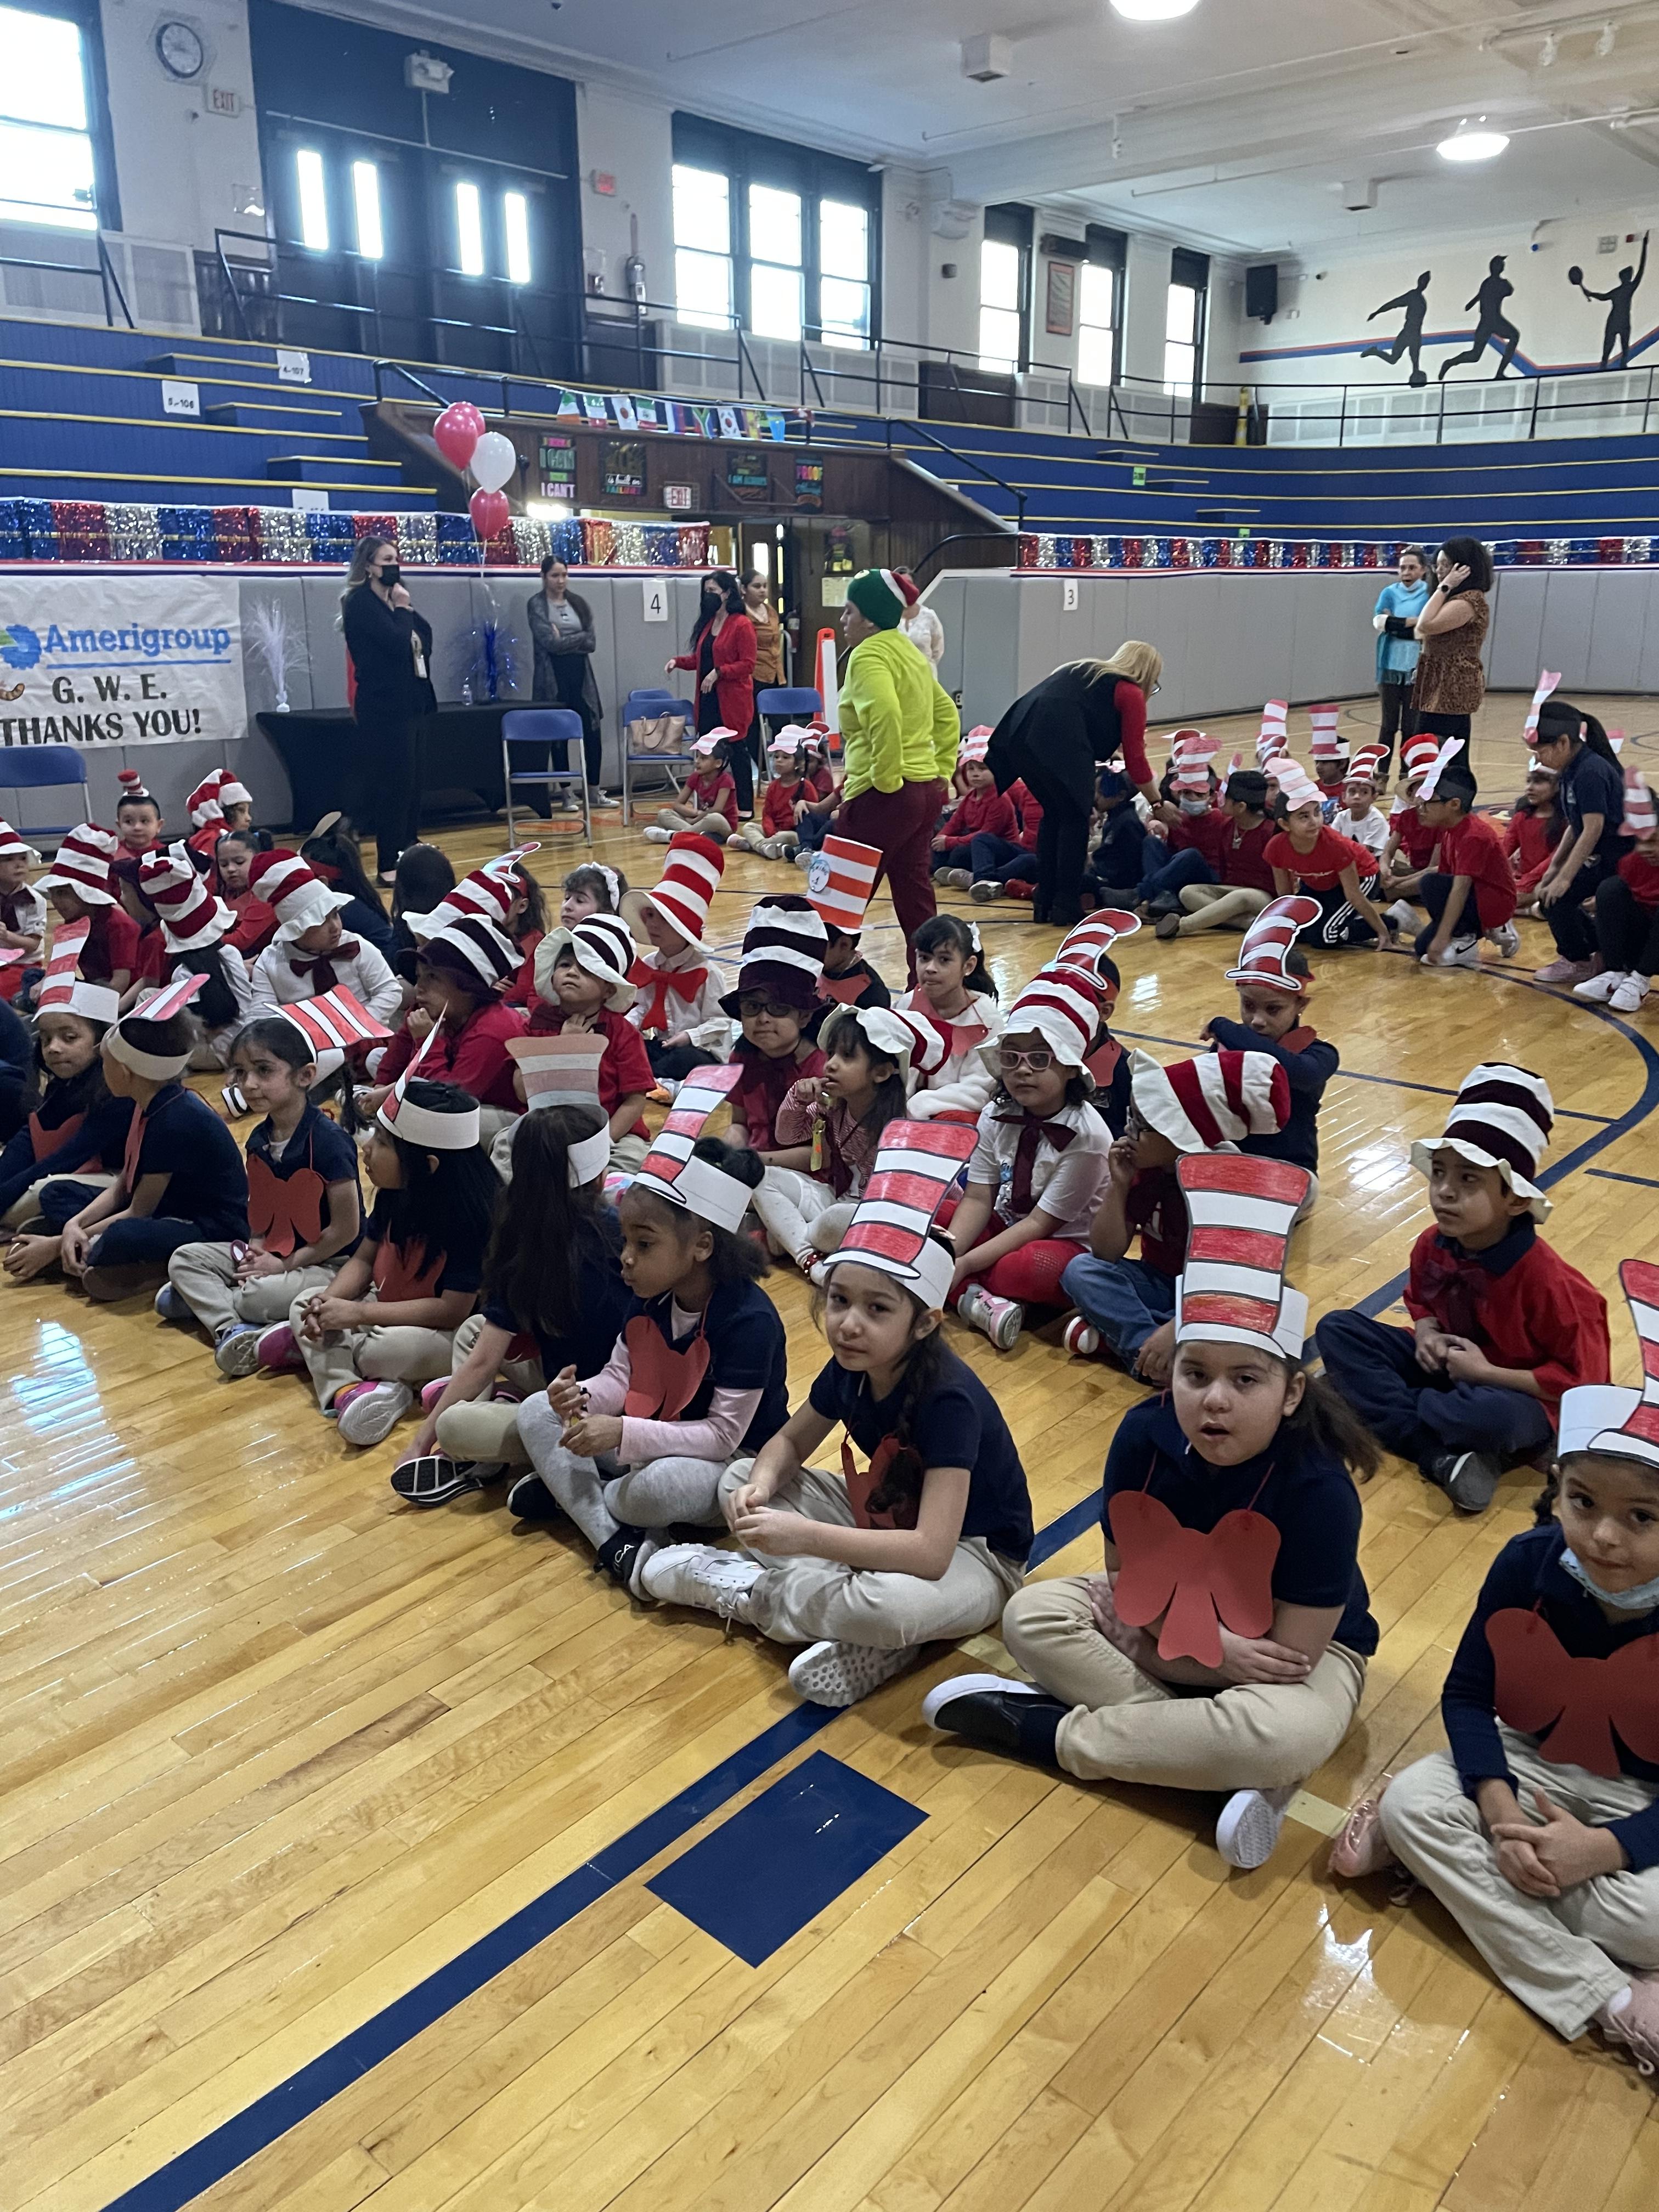 The Importance of Read Across America at the Washington School